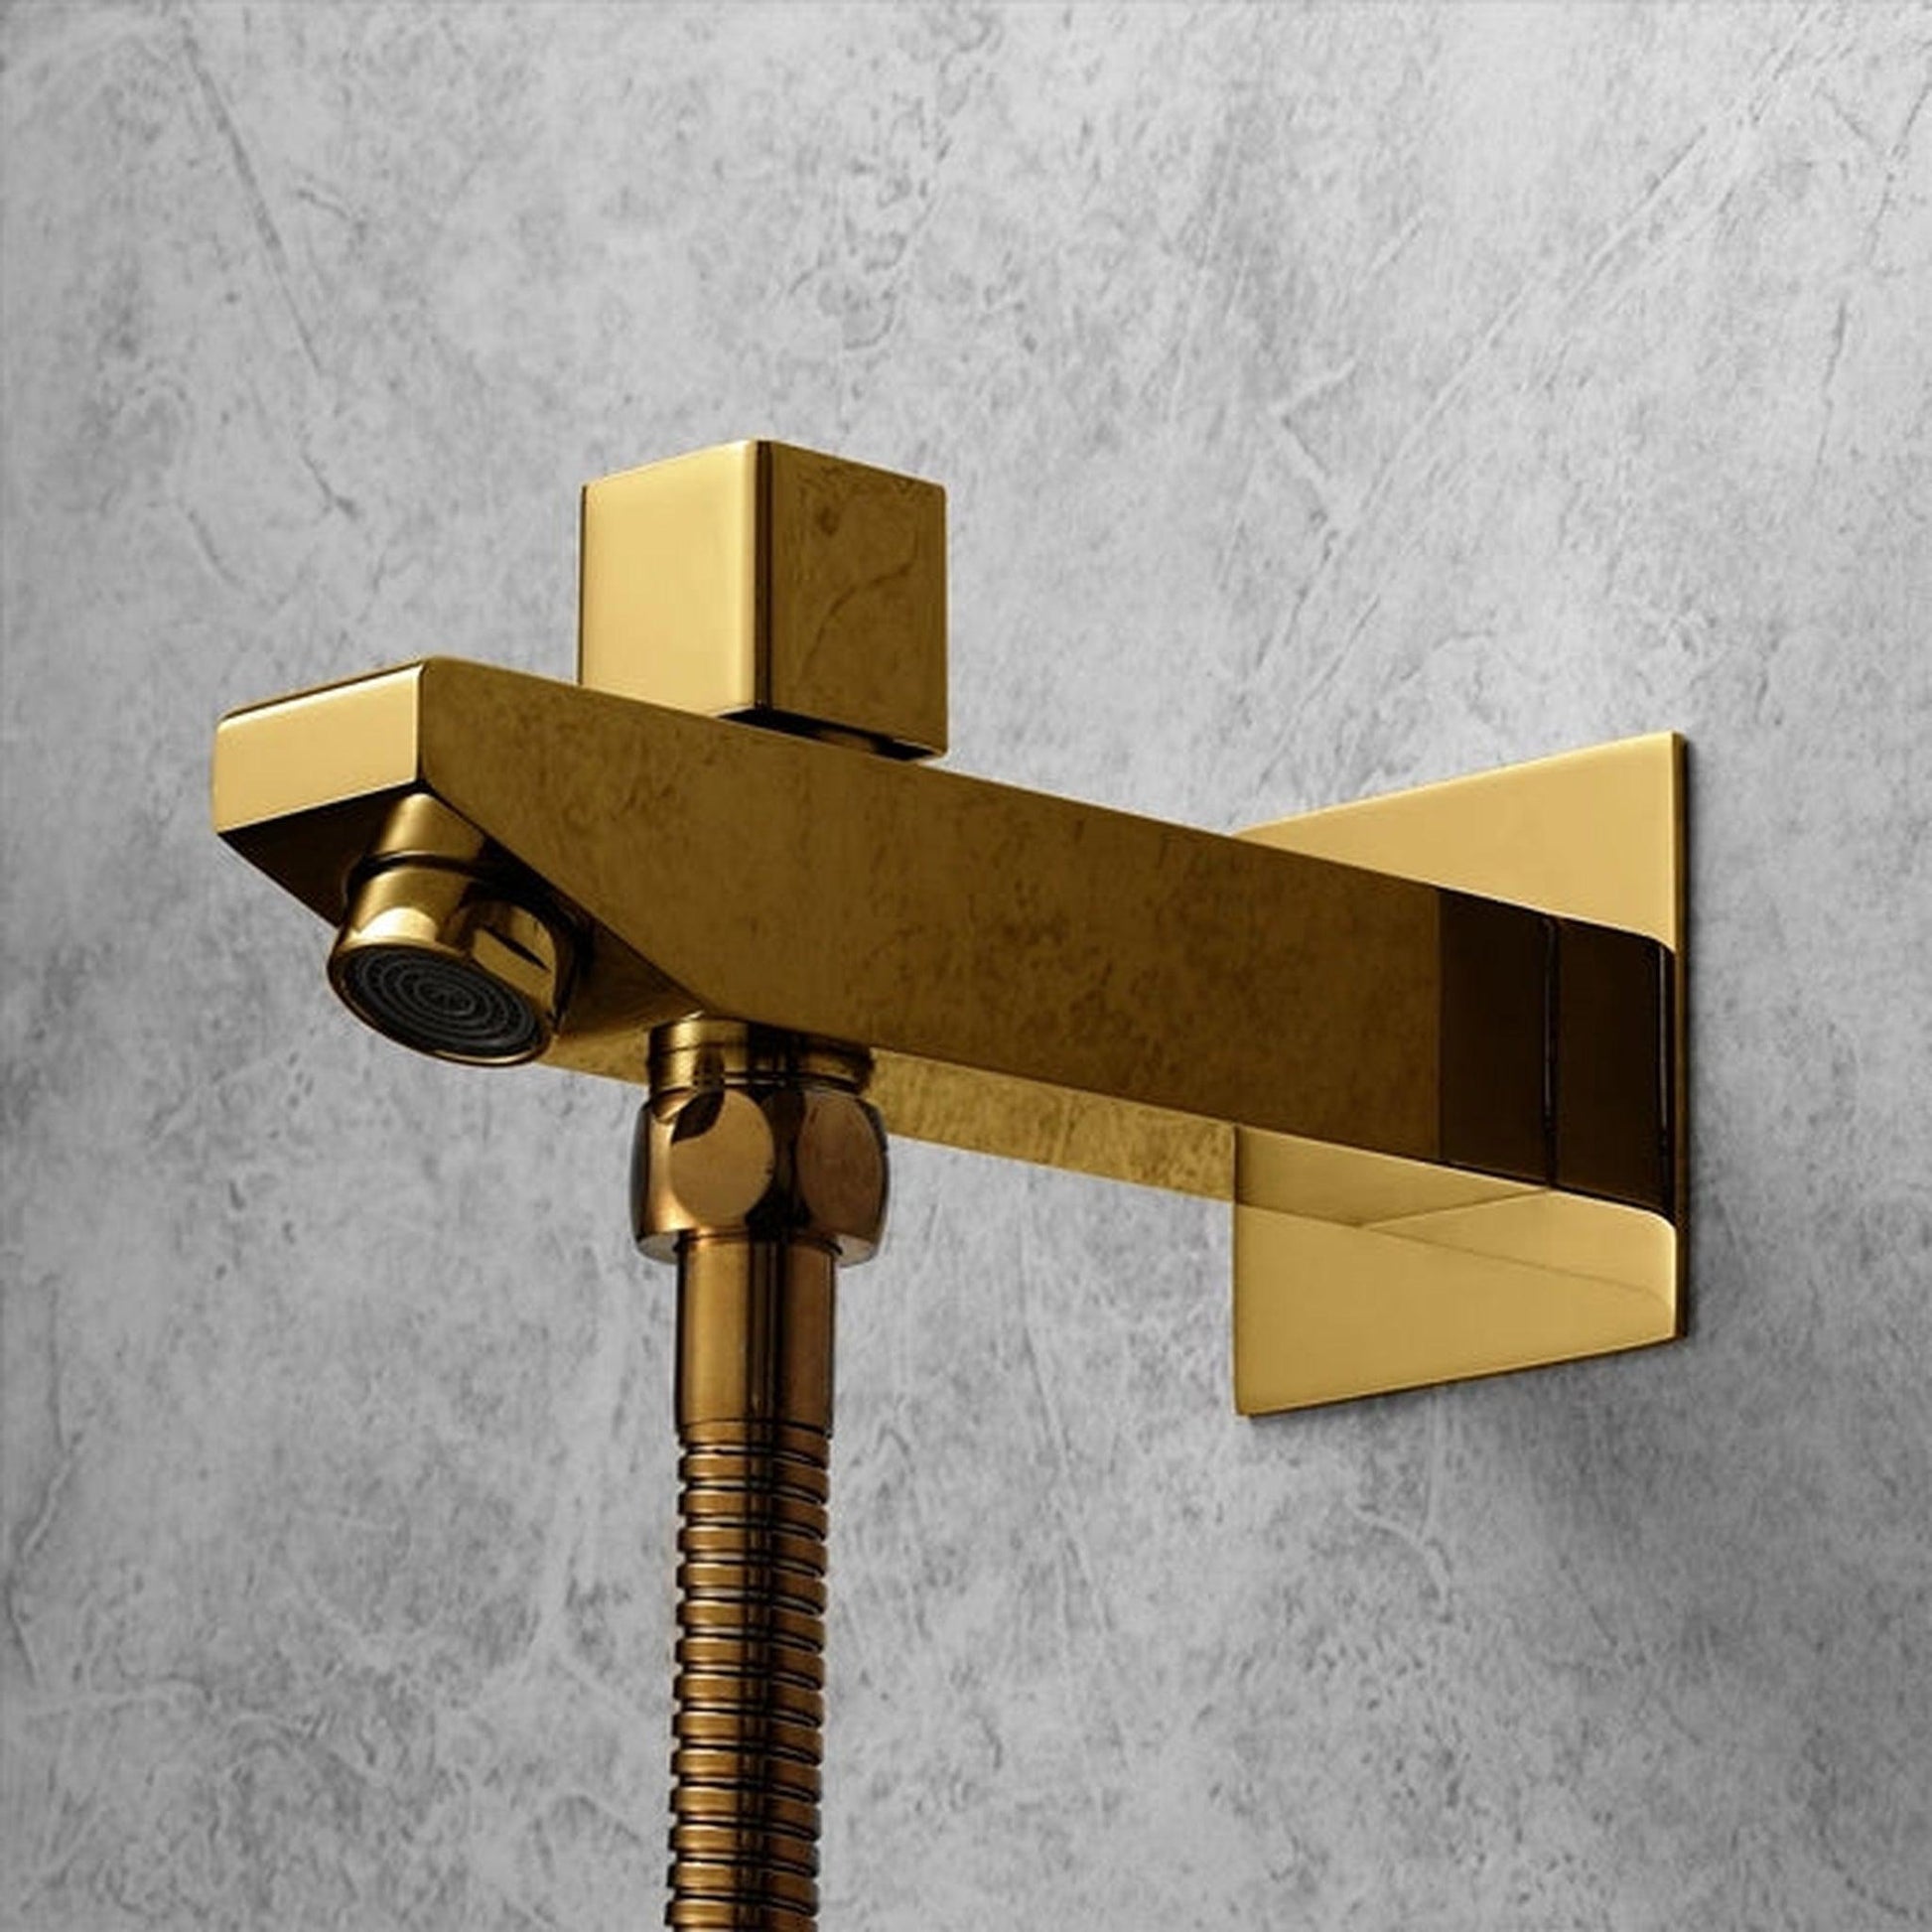 Fontana Terni Polished Gold Recessed Ceiling Mounted Remote Controlled Thermostatic LED Rainfall Waterfall Mist Hot and Cold Shower System With Square Hand Shower